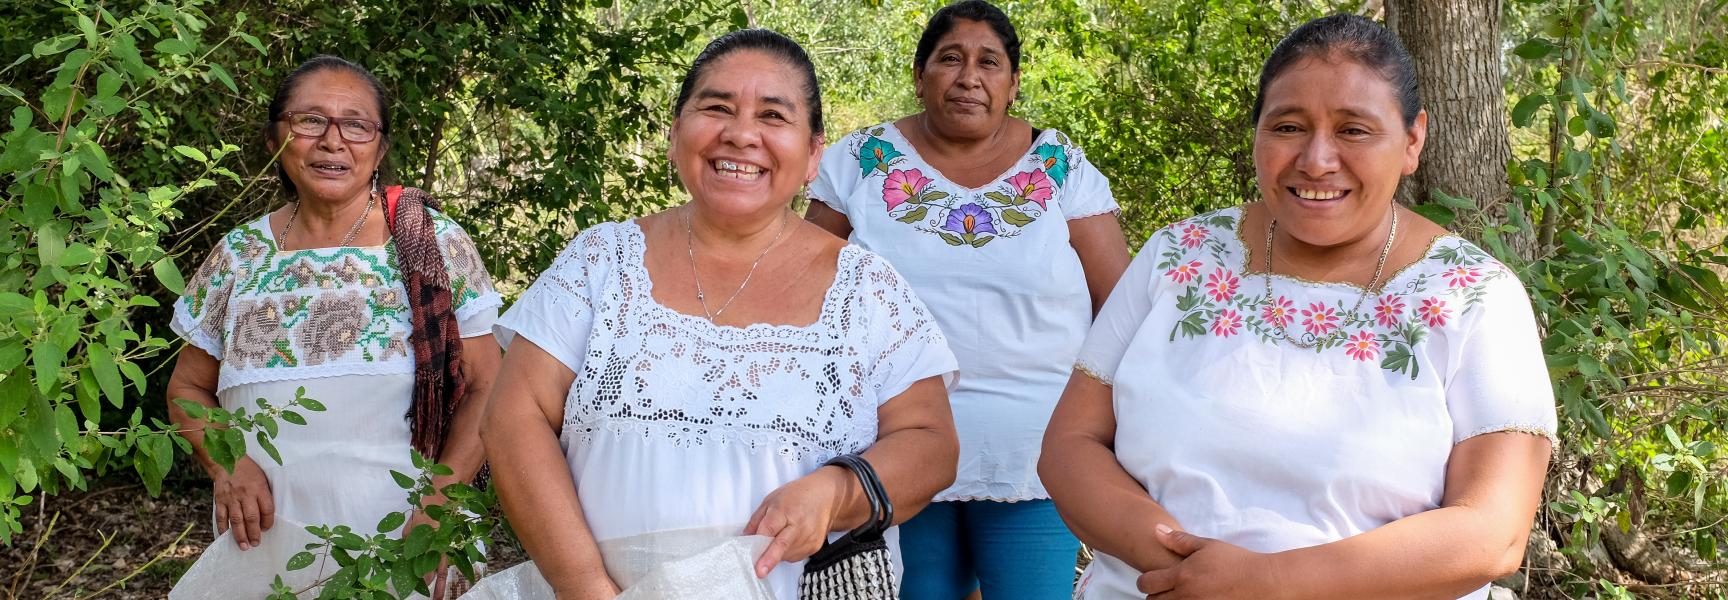 Rural women smiling in Mexico